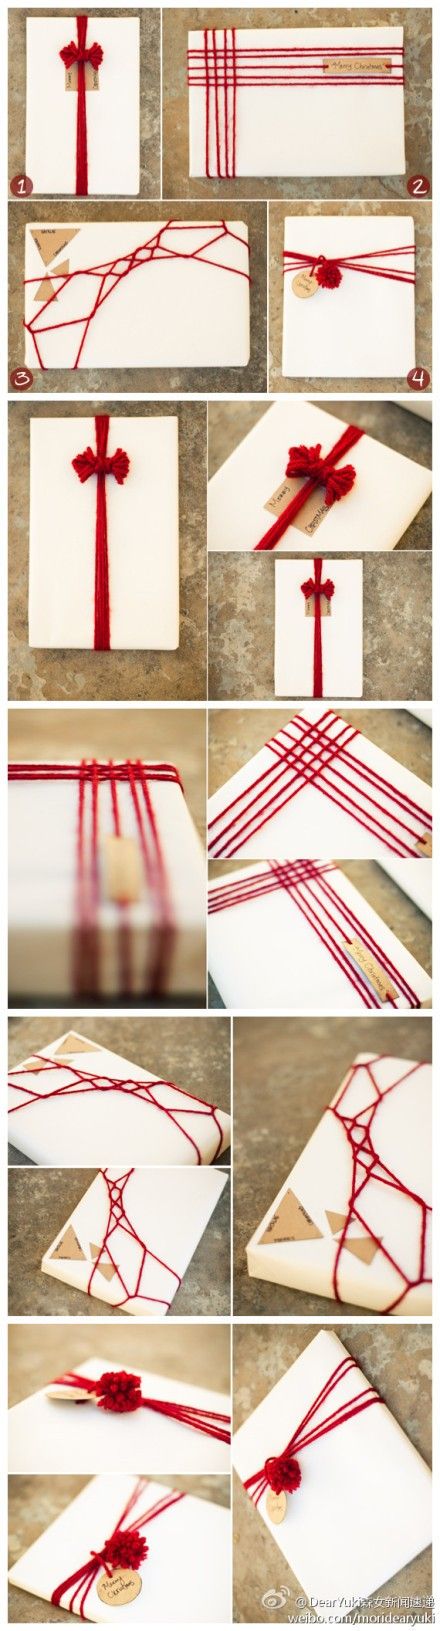 Gift wrapping ideas.